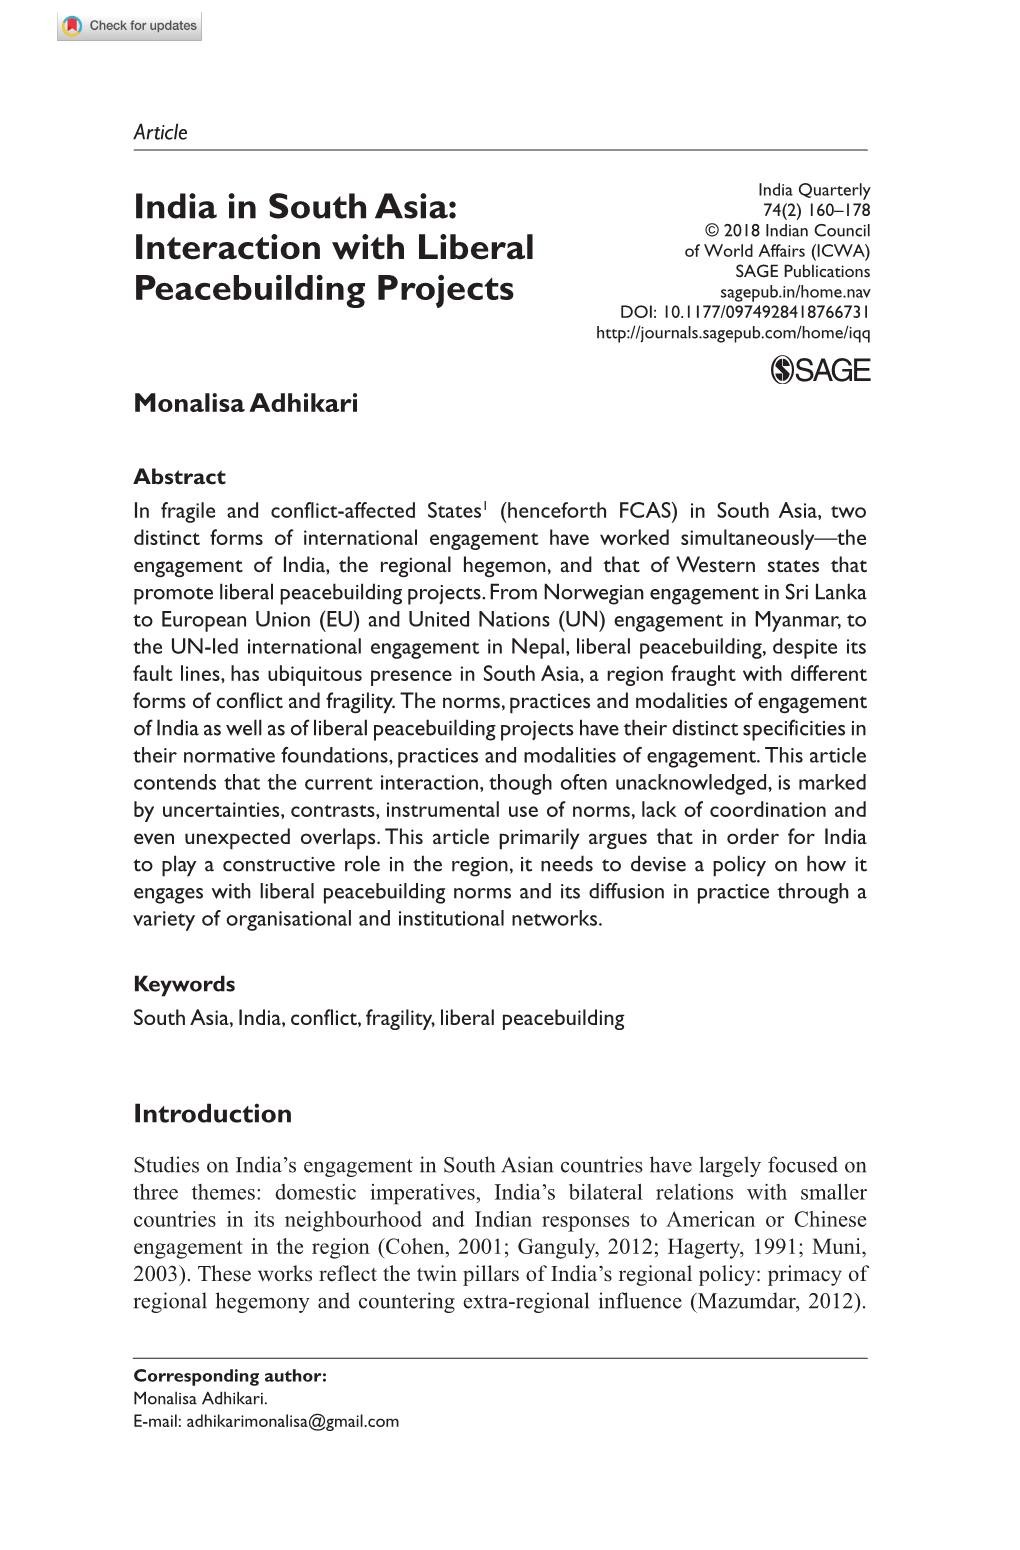 India in South Asia: Interaction with Liberal Peacebuilding Projects